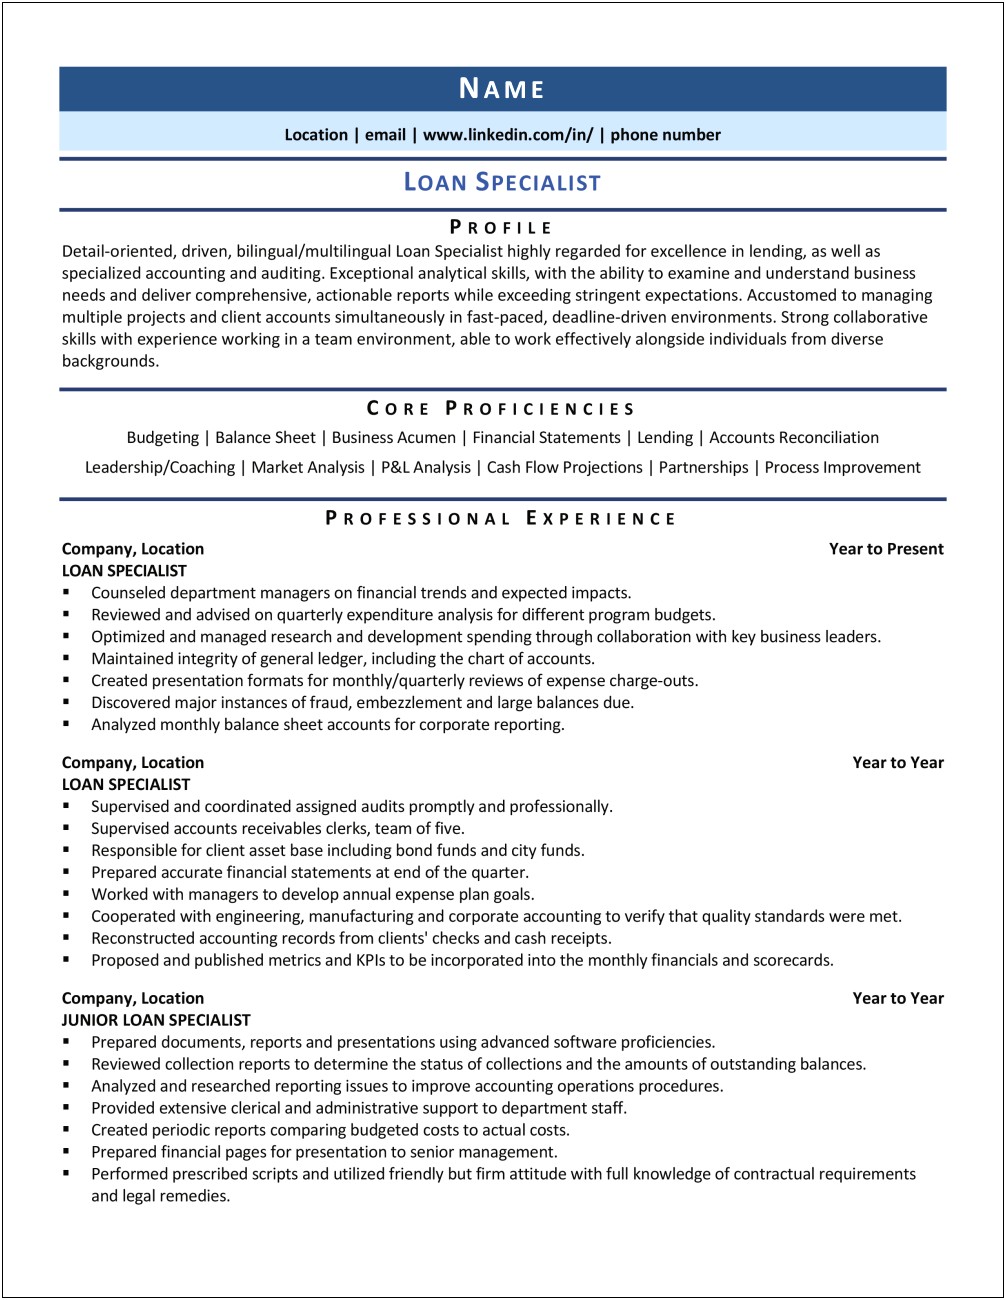 Example Of Professional Resume To Obtain Loan